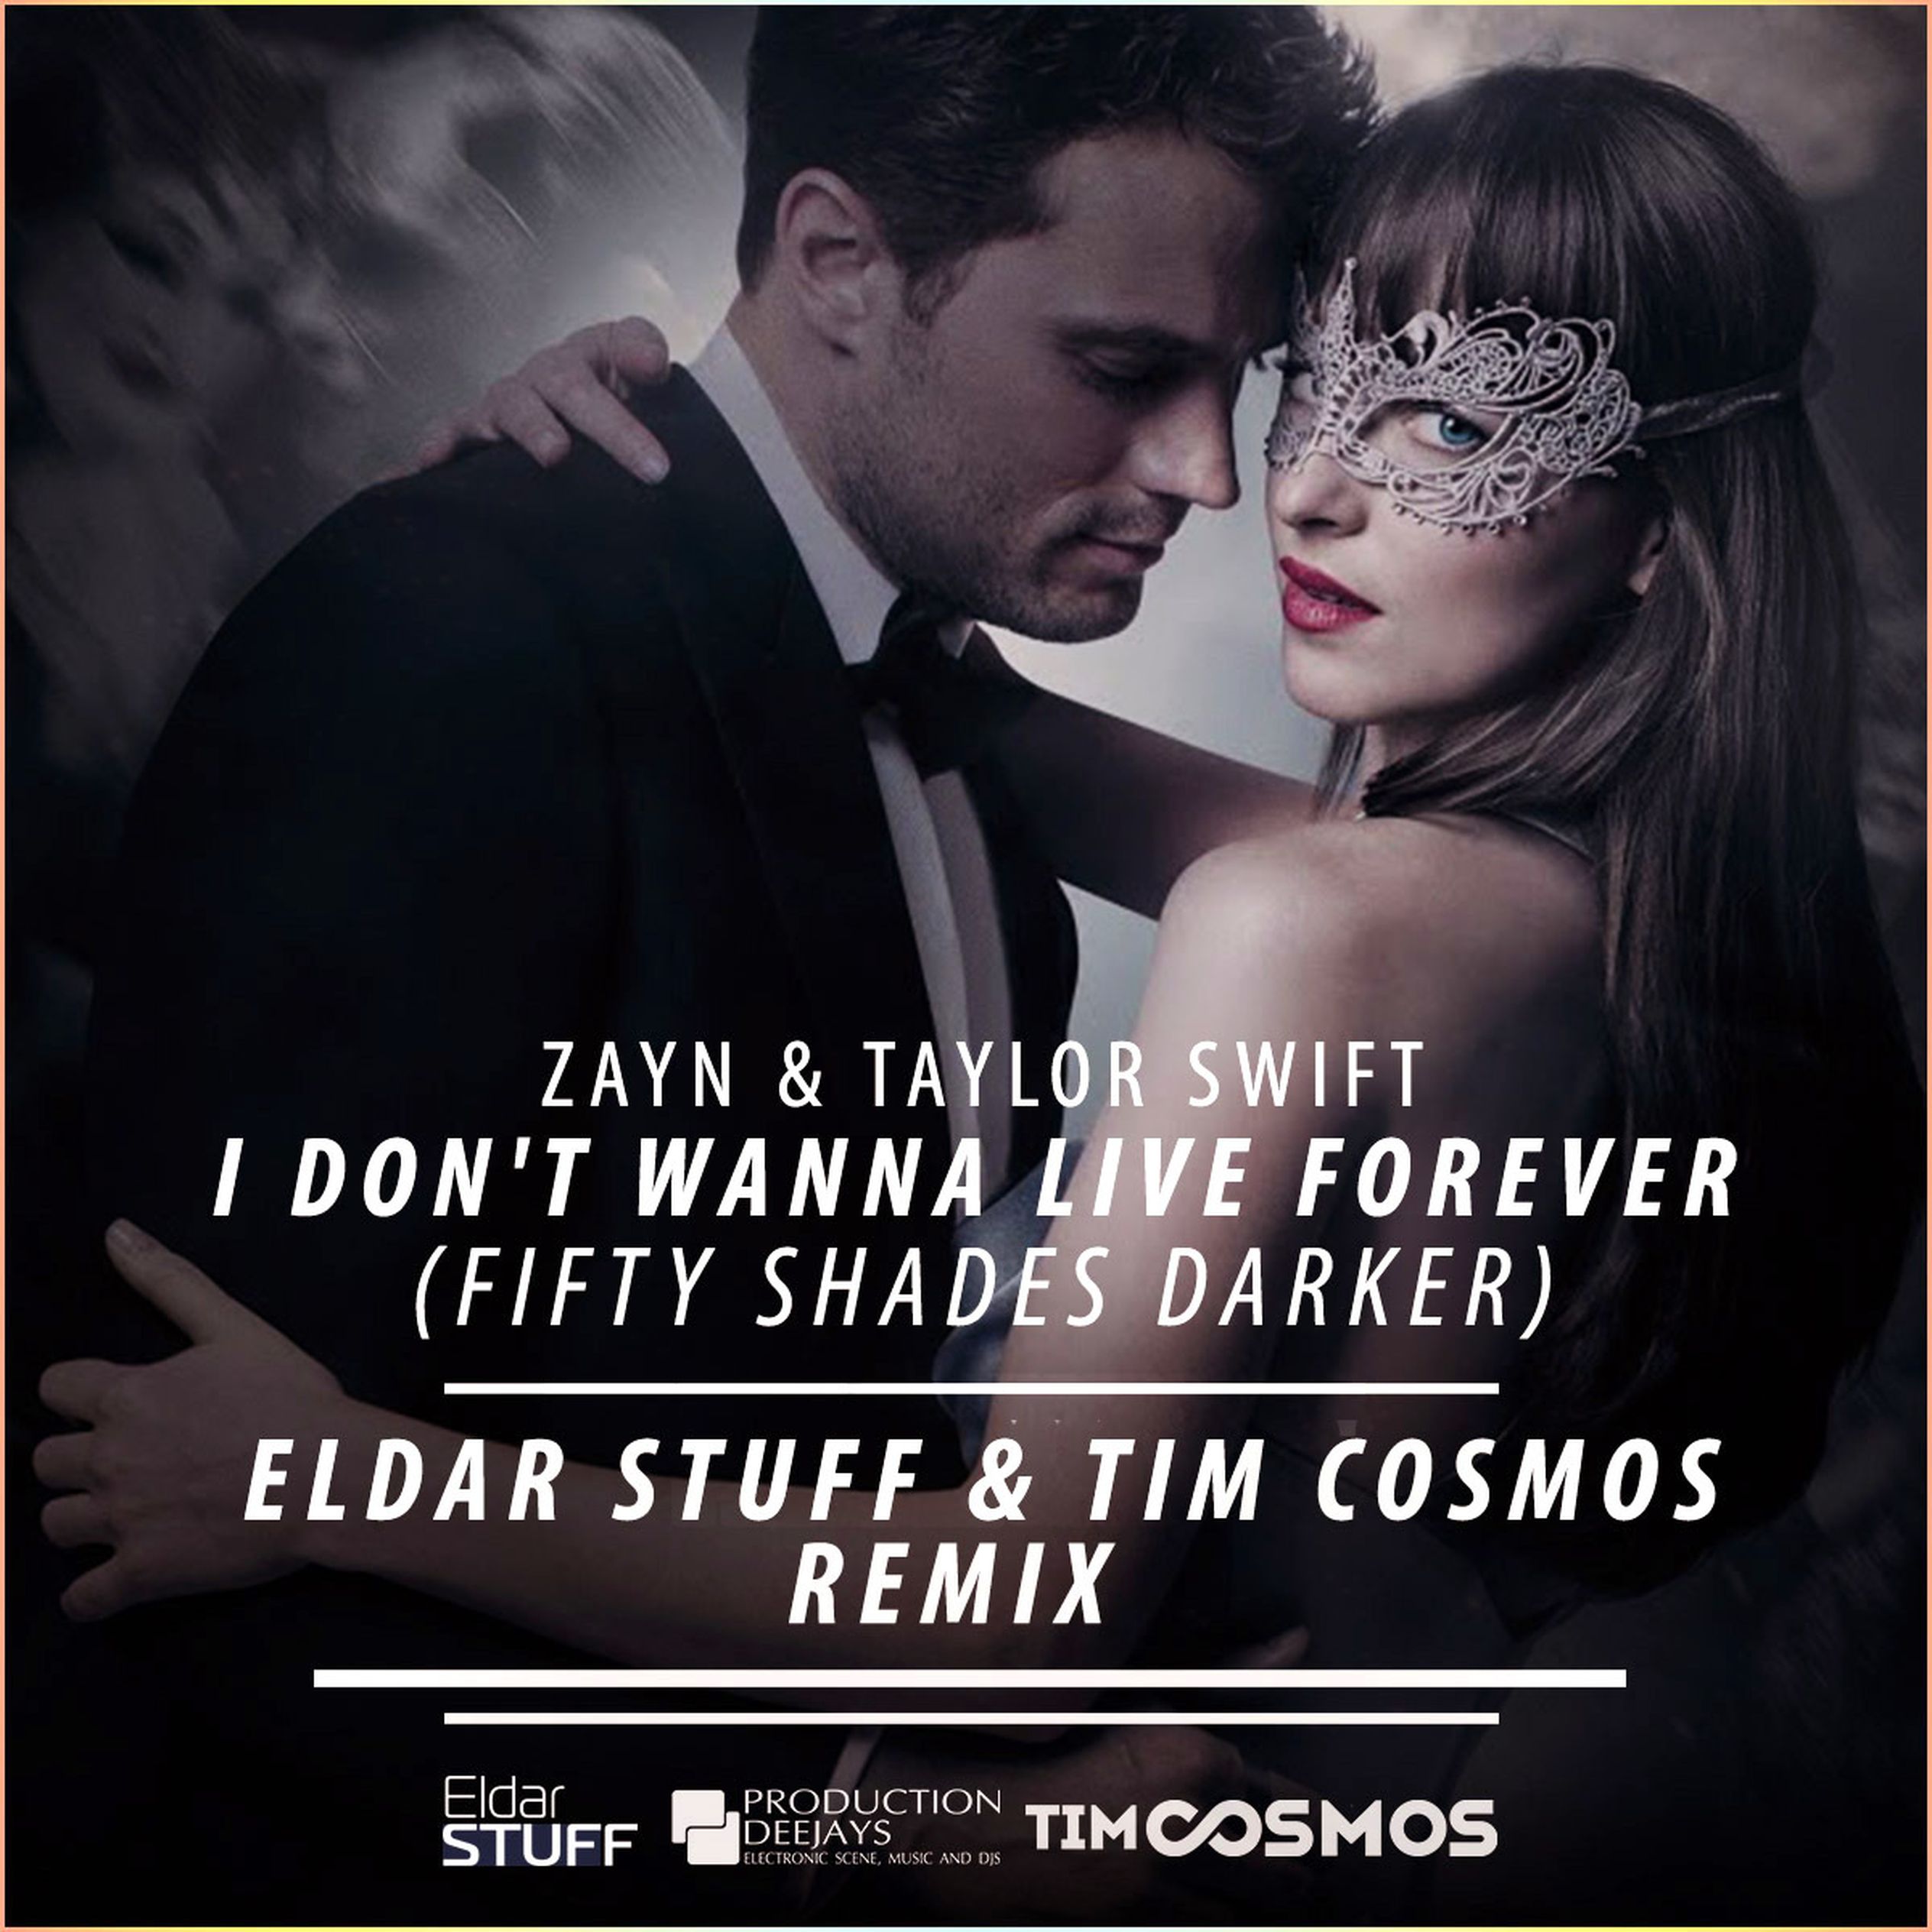 I don t wanna live forever zayn. Тейлор Свифт i don't wanna Live Forever. Zayn Taylor Swift. Zayn - i don't wanna Forever. I don't wanna Live Forever (Fifty Shades Darker).